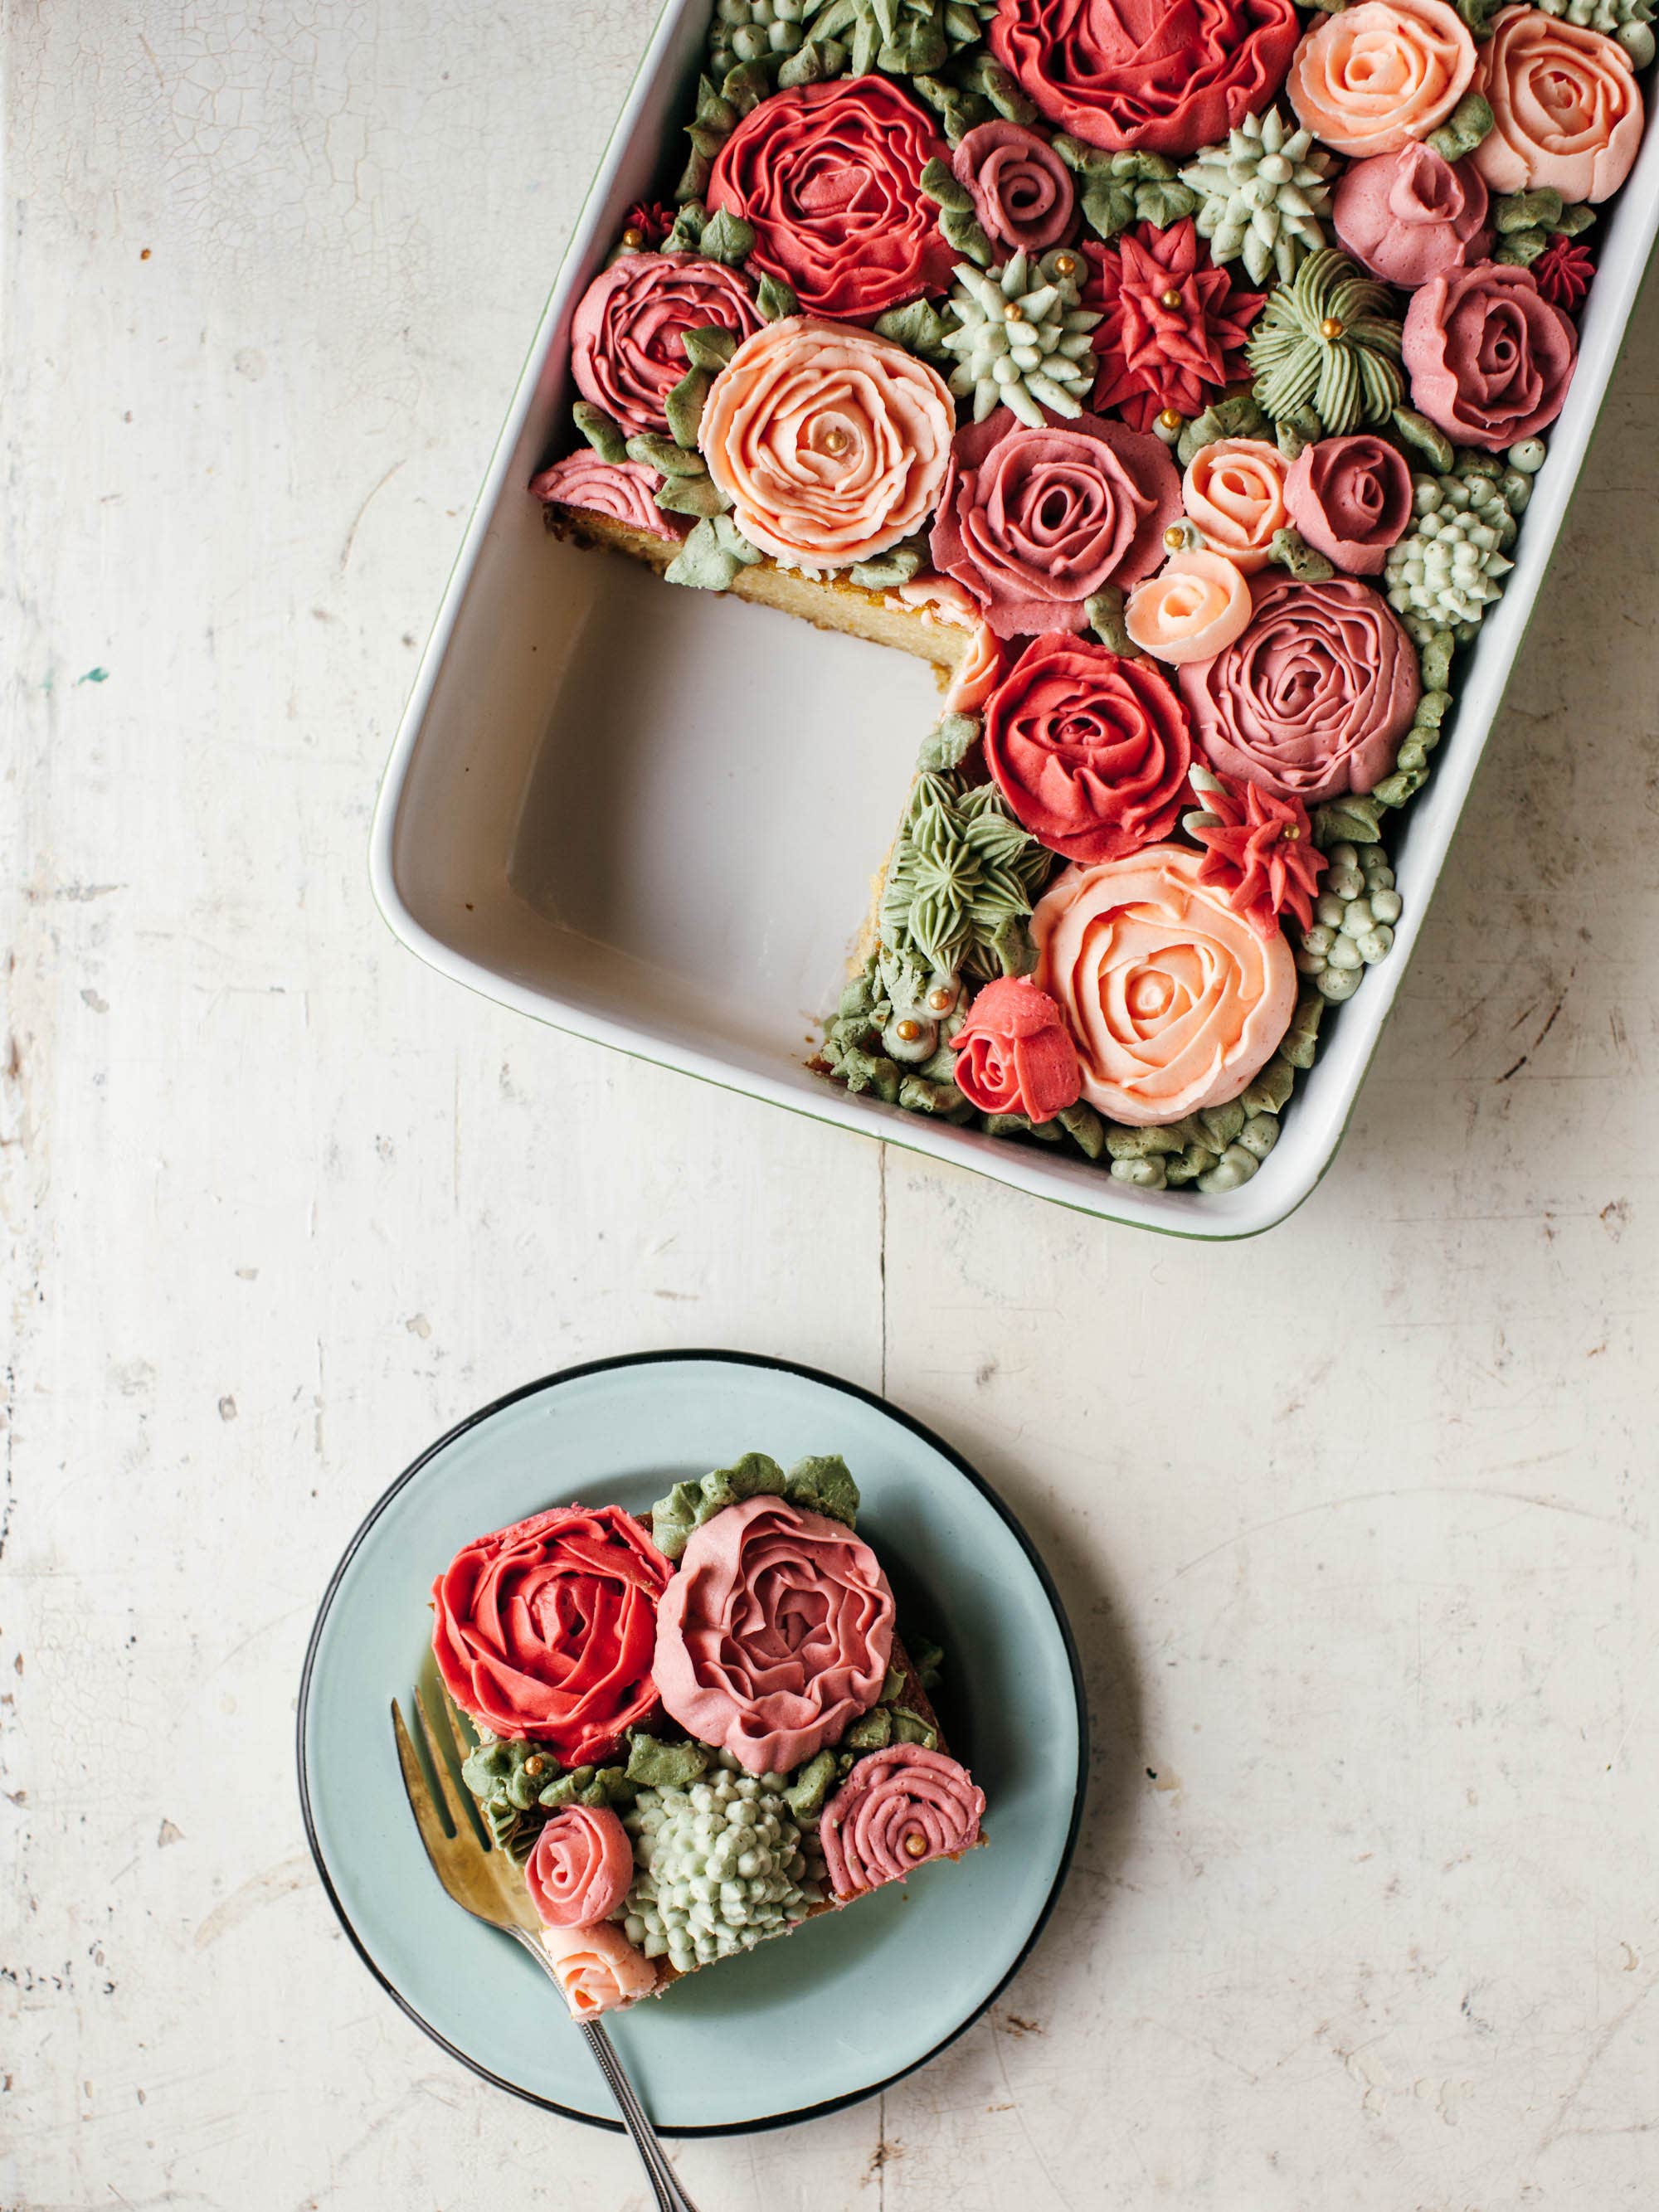 18 Stunning Easter Cakes That Make Impressive Centerpieces